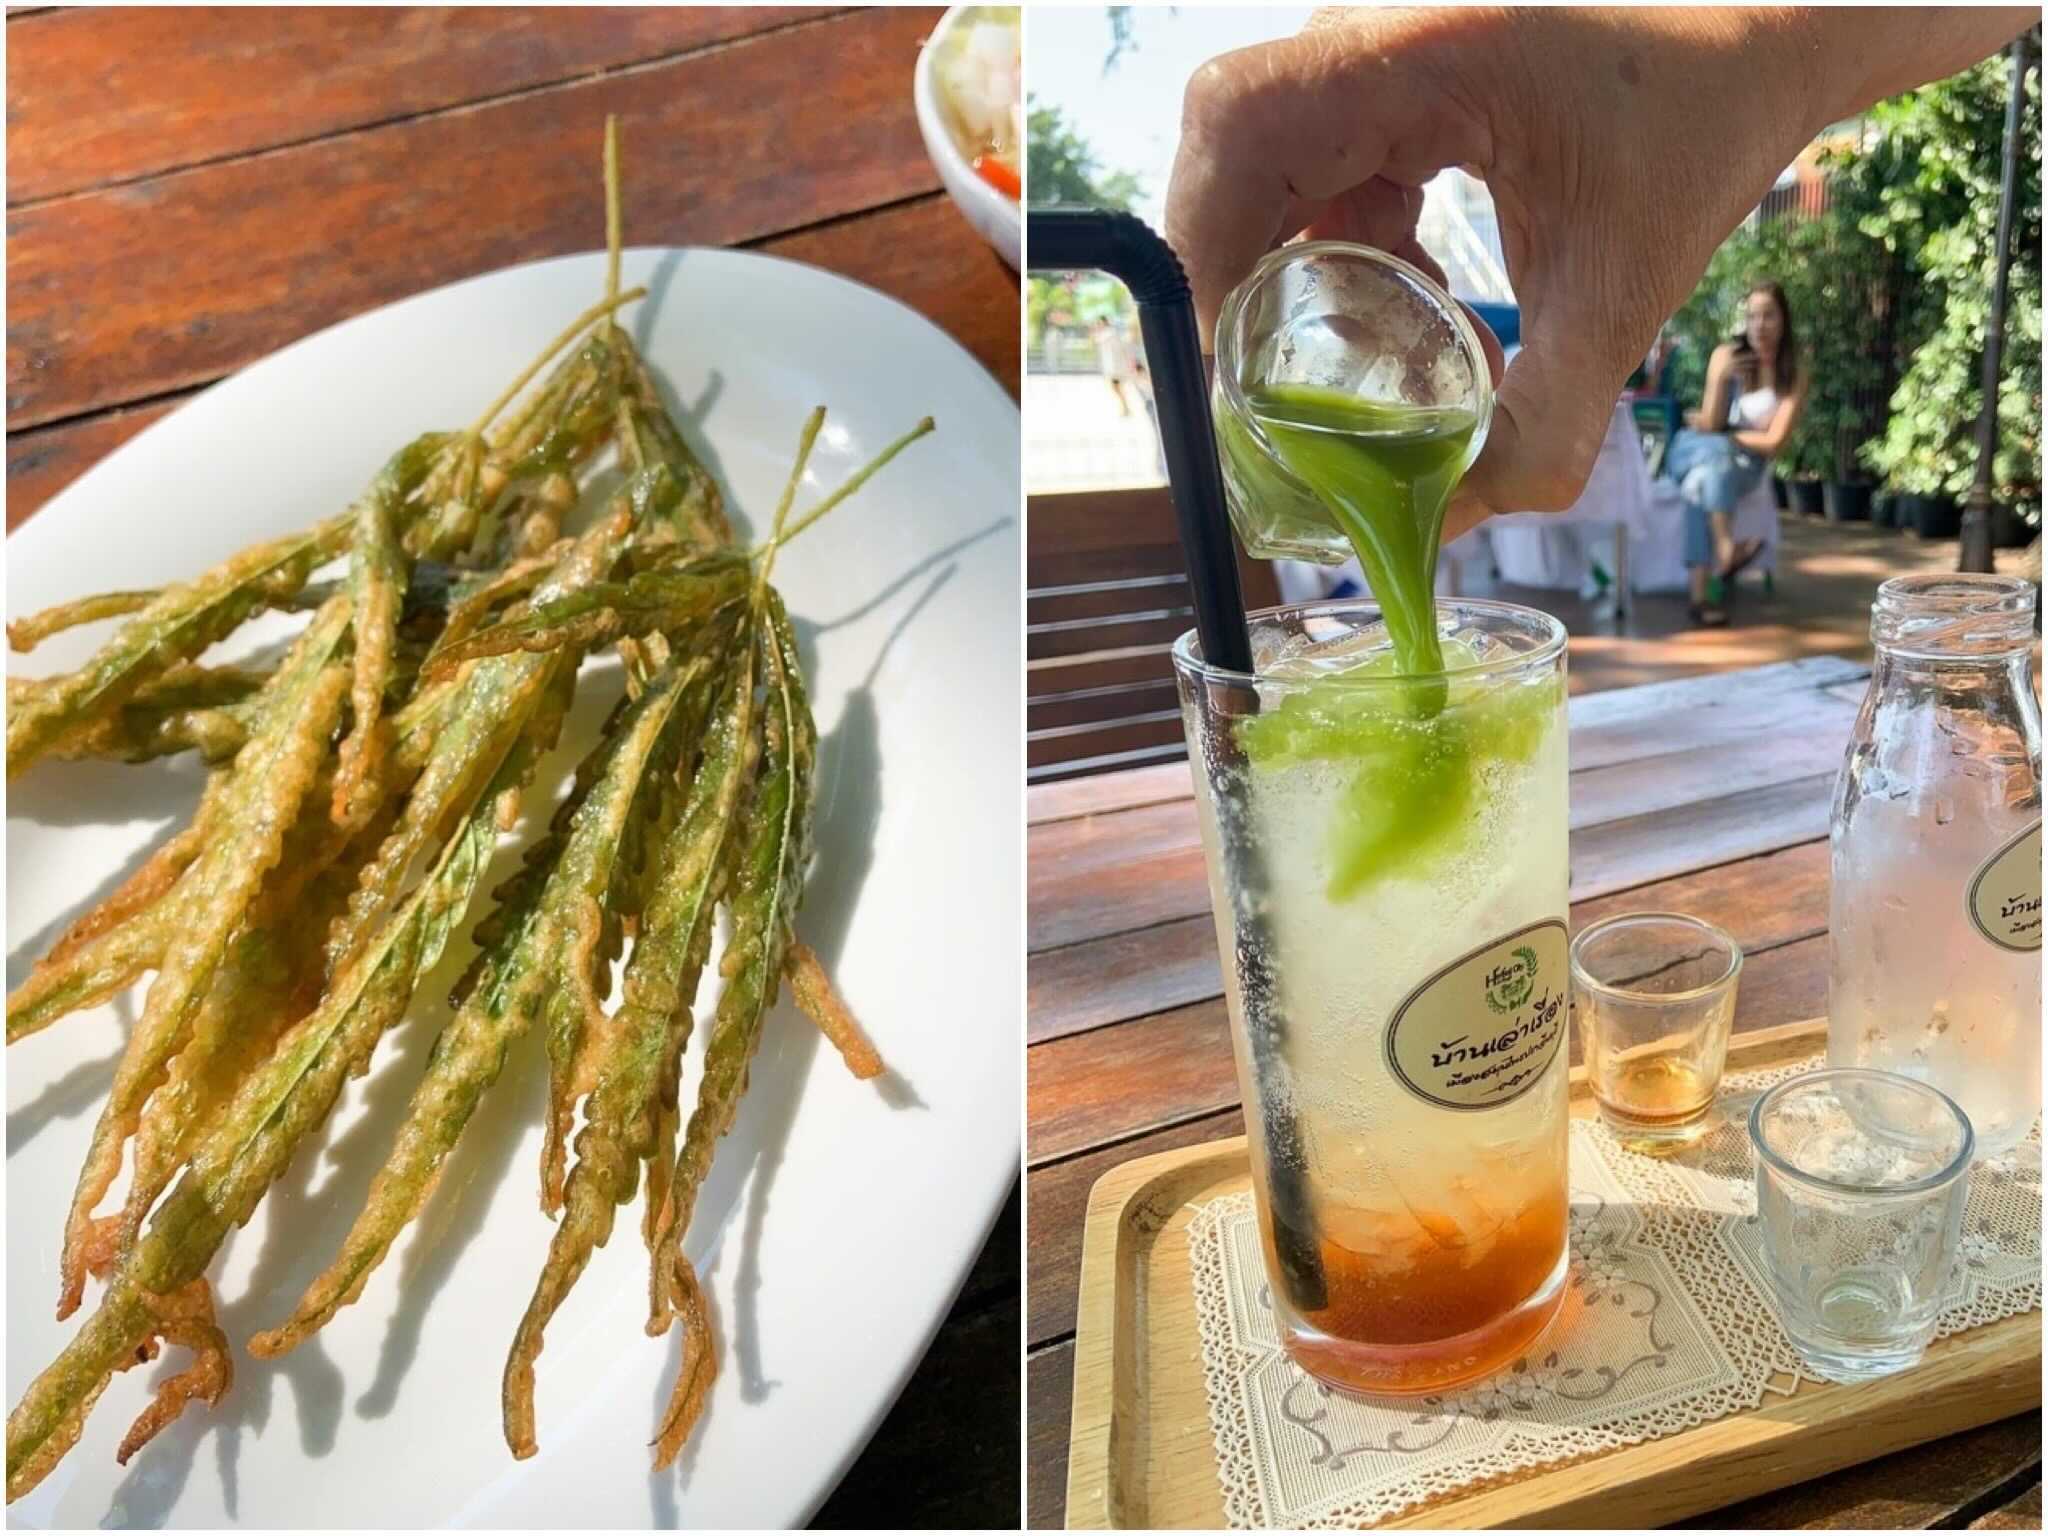 Deep-fried weed leaves served with spicy mango salad, at left, and sparkling passion fruit mixed with weed juice. 
